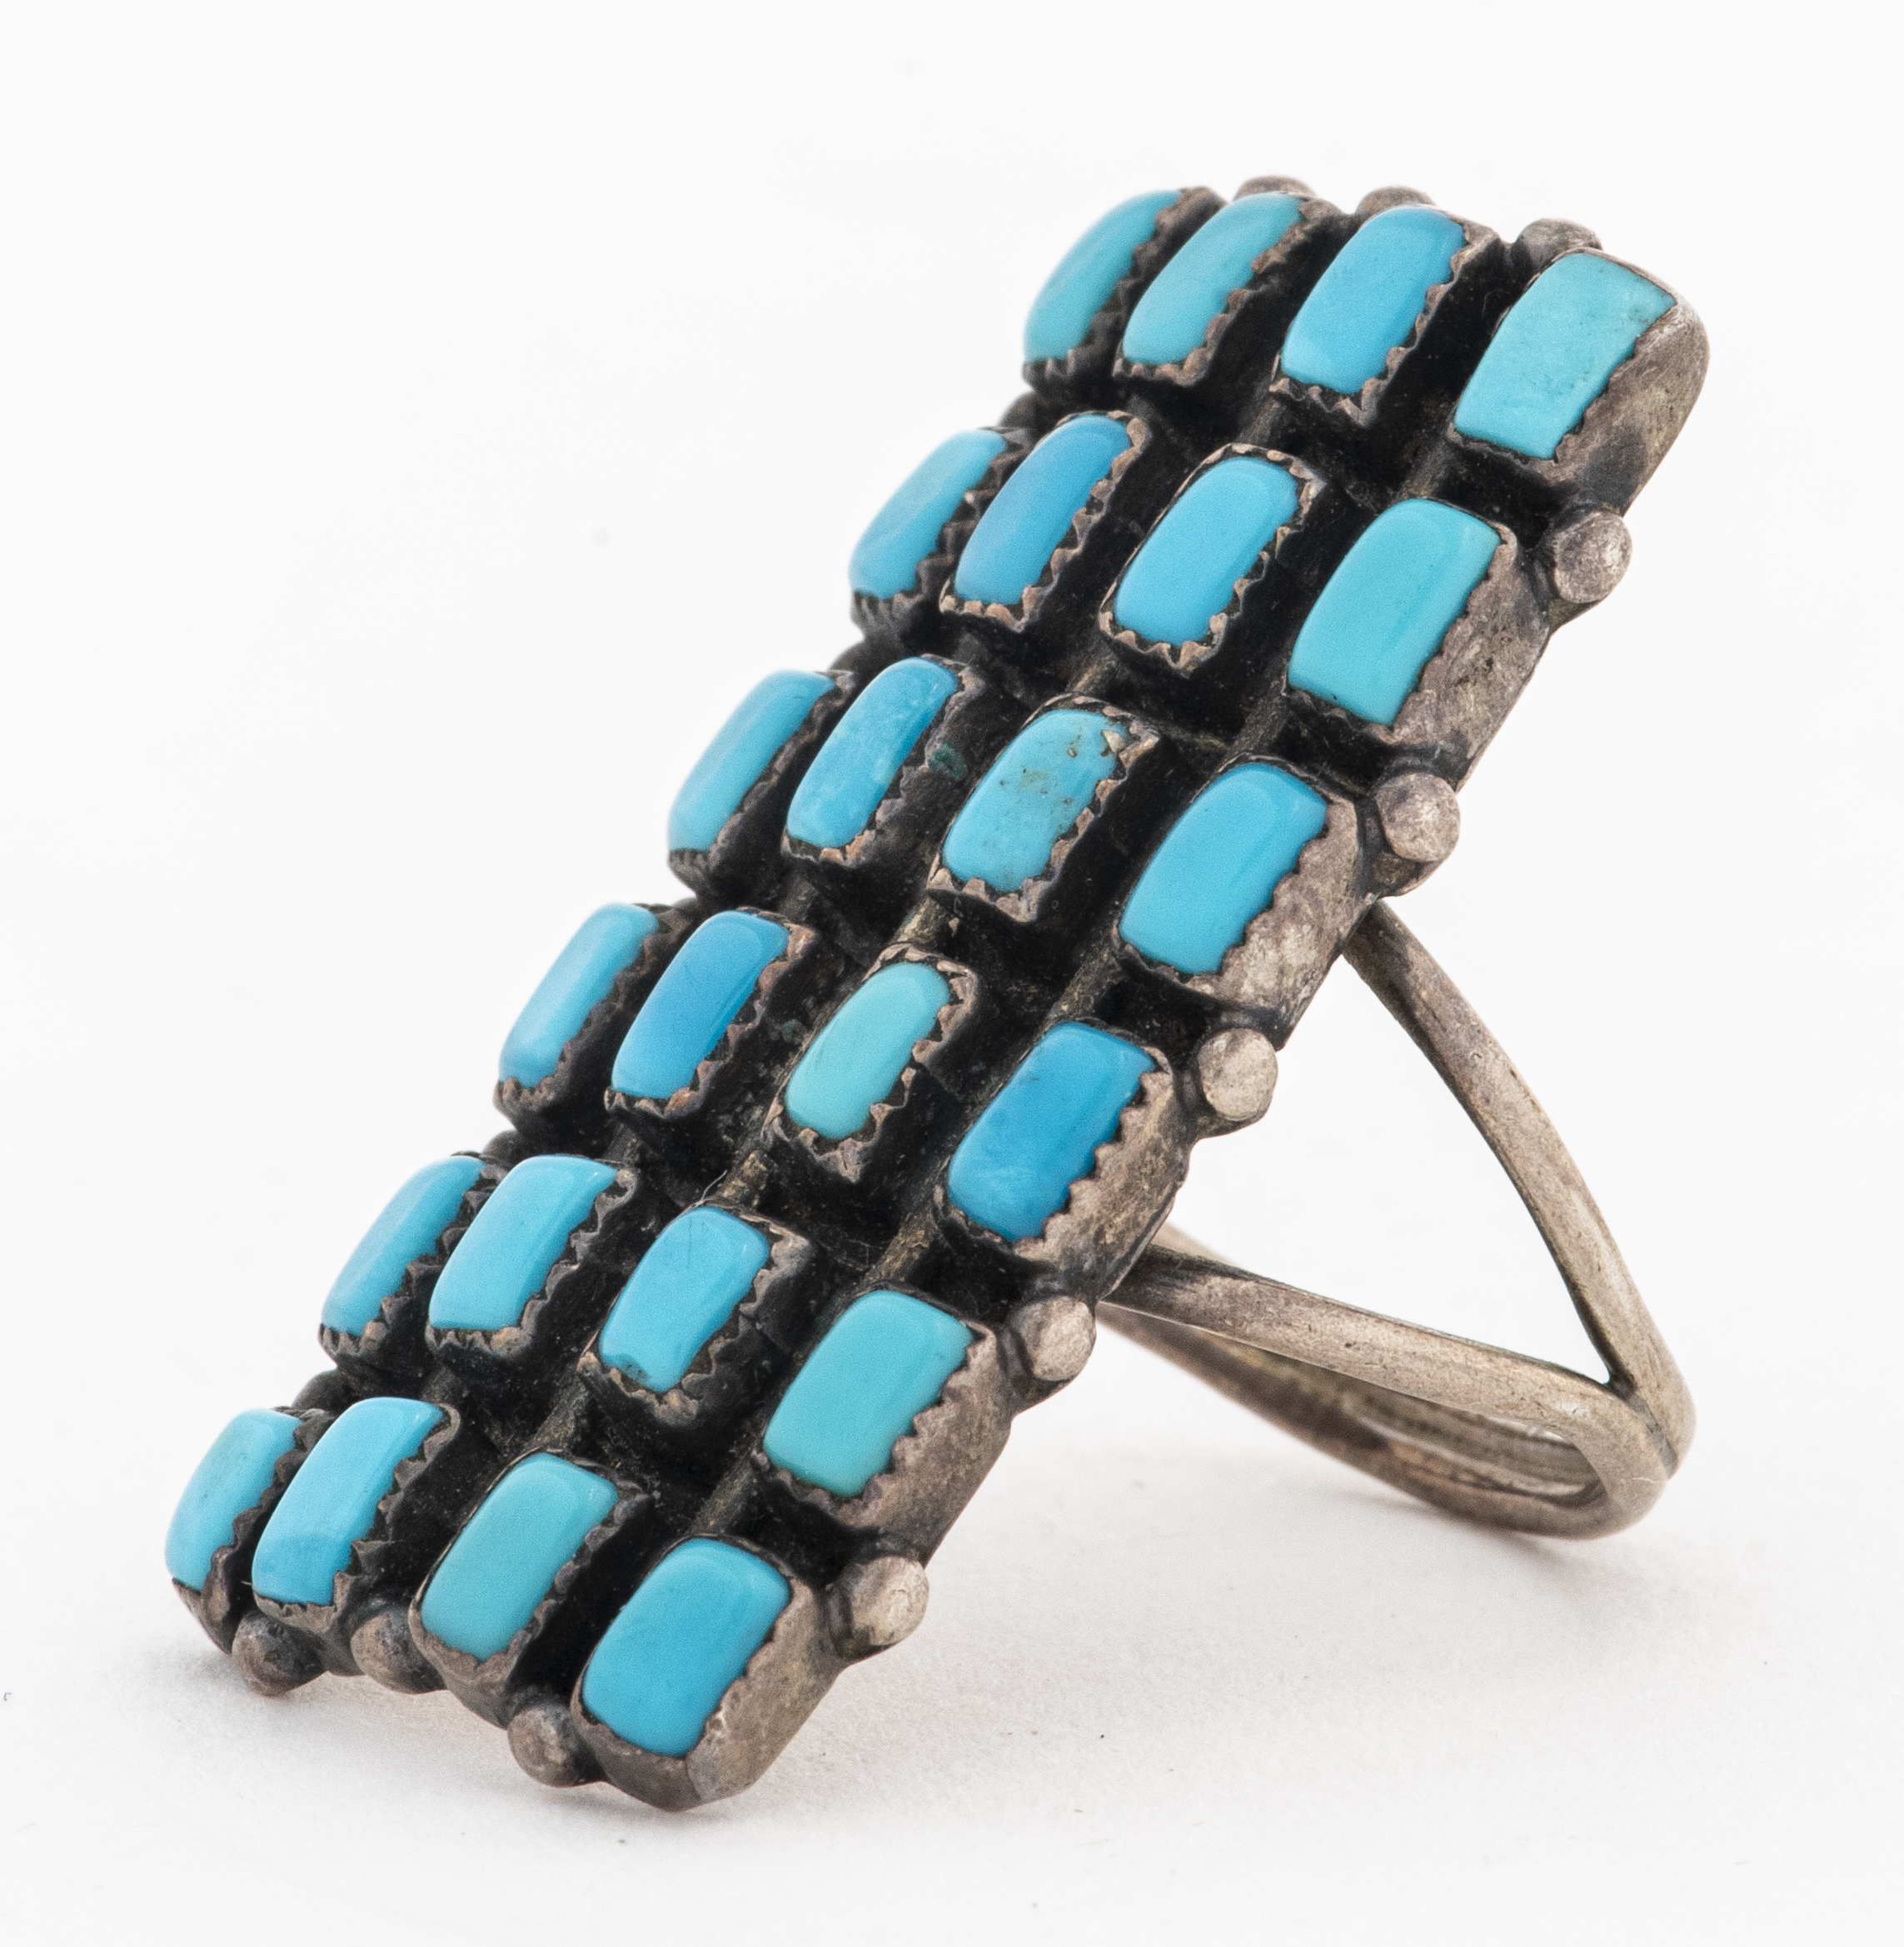 NATIVE AMERICAN NAVAJO SILVER TURQUOISE 3c588a